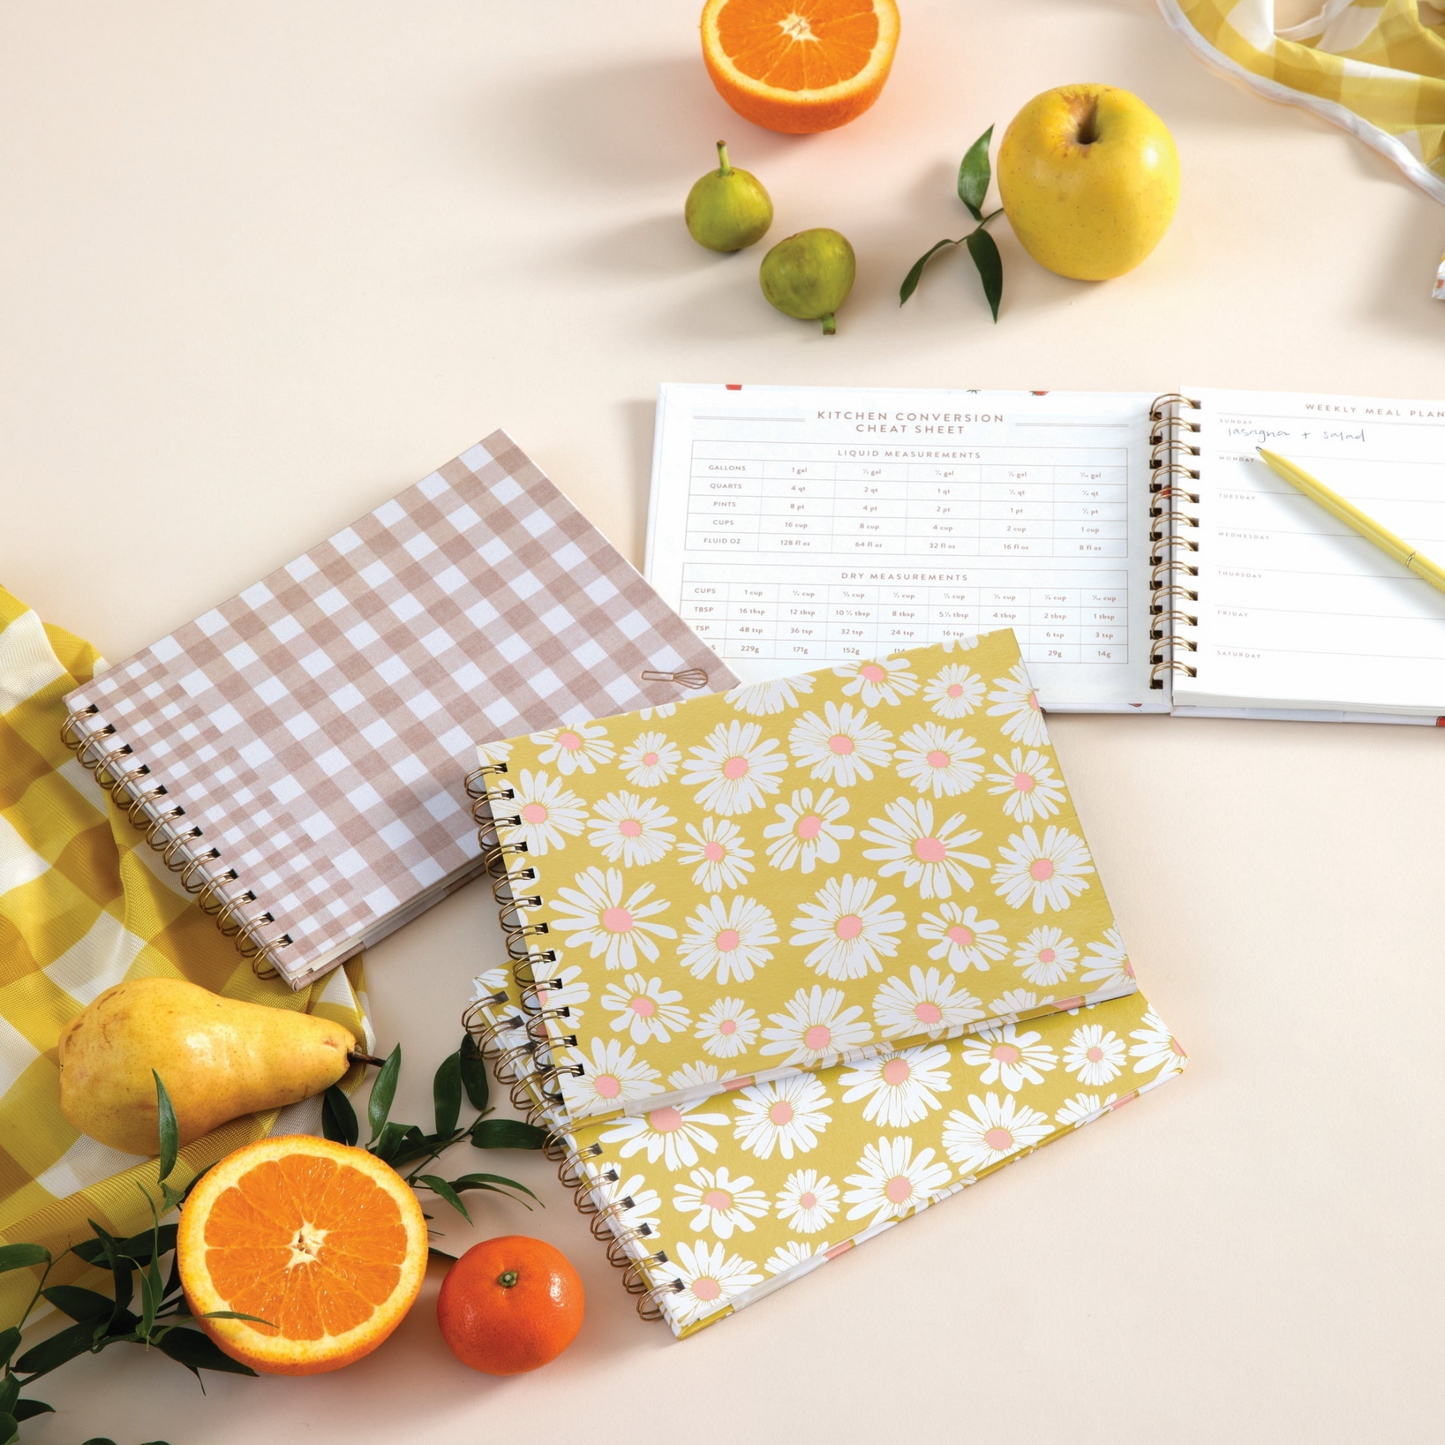 Lifestyle image of multiple planners open on table and surrounded by fruit and market bag.